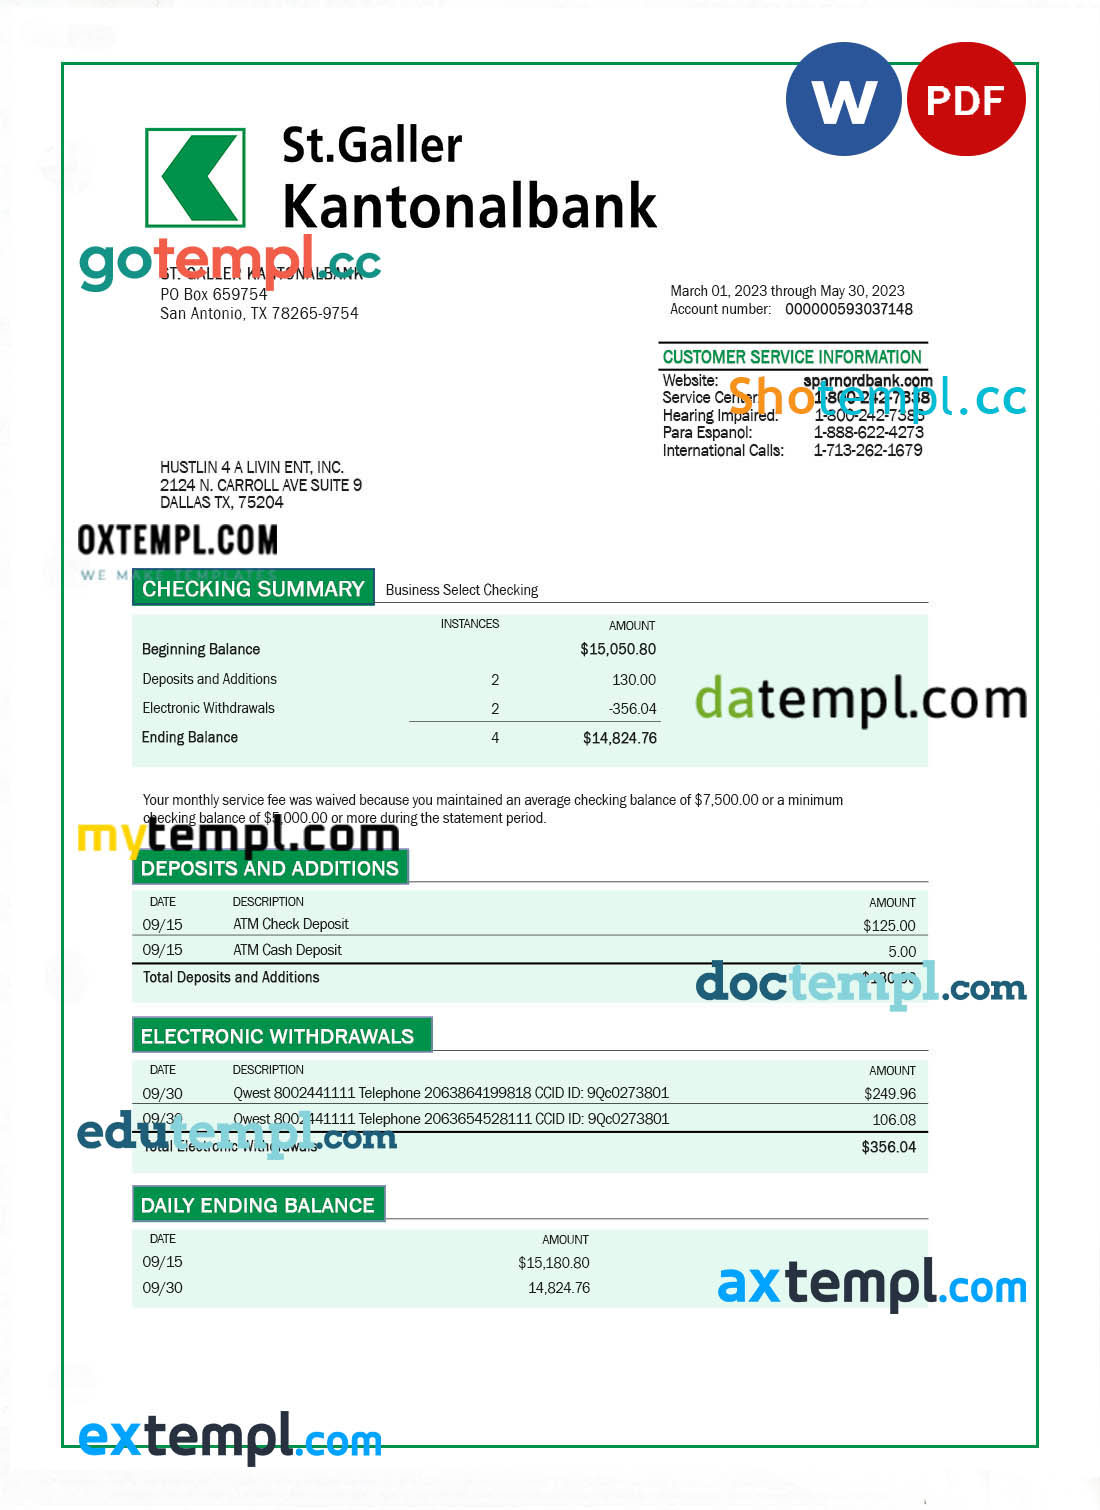 editable template, ST. Galler Kantonalbank organization checking account statement Word and PDF template